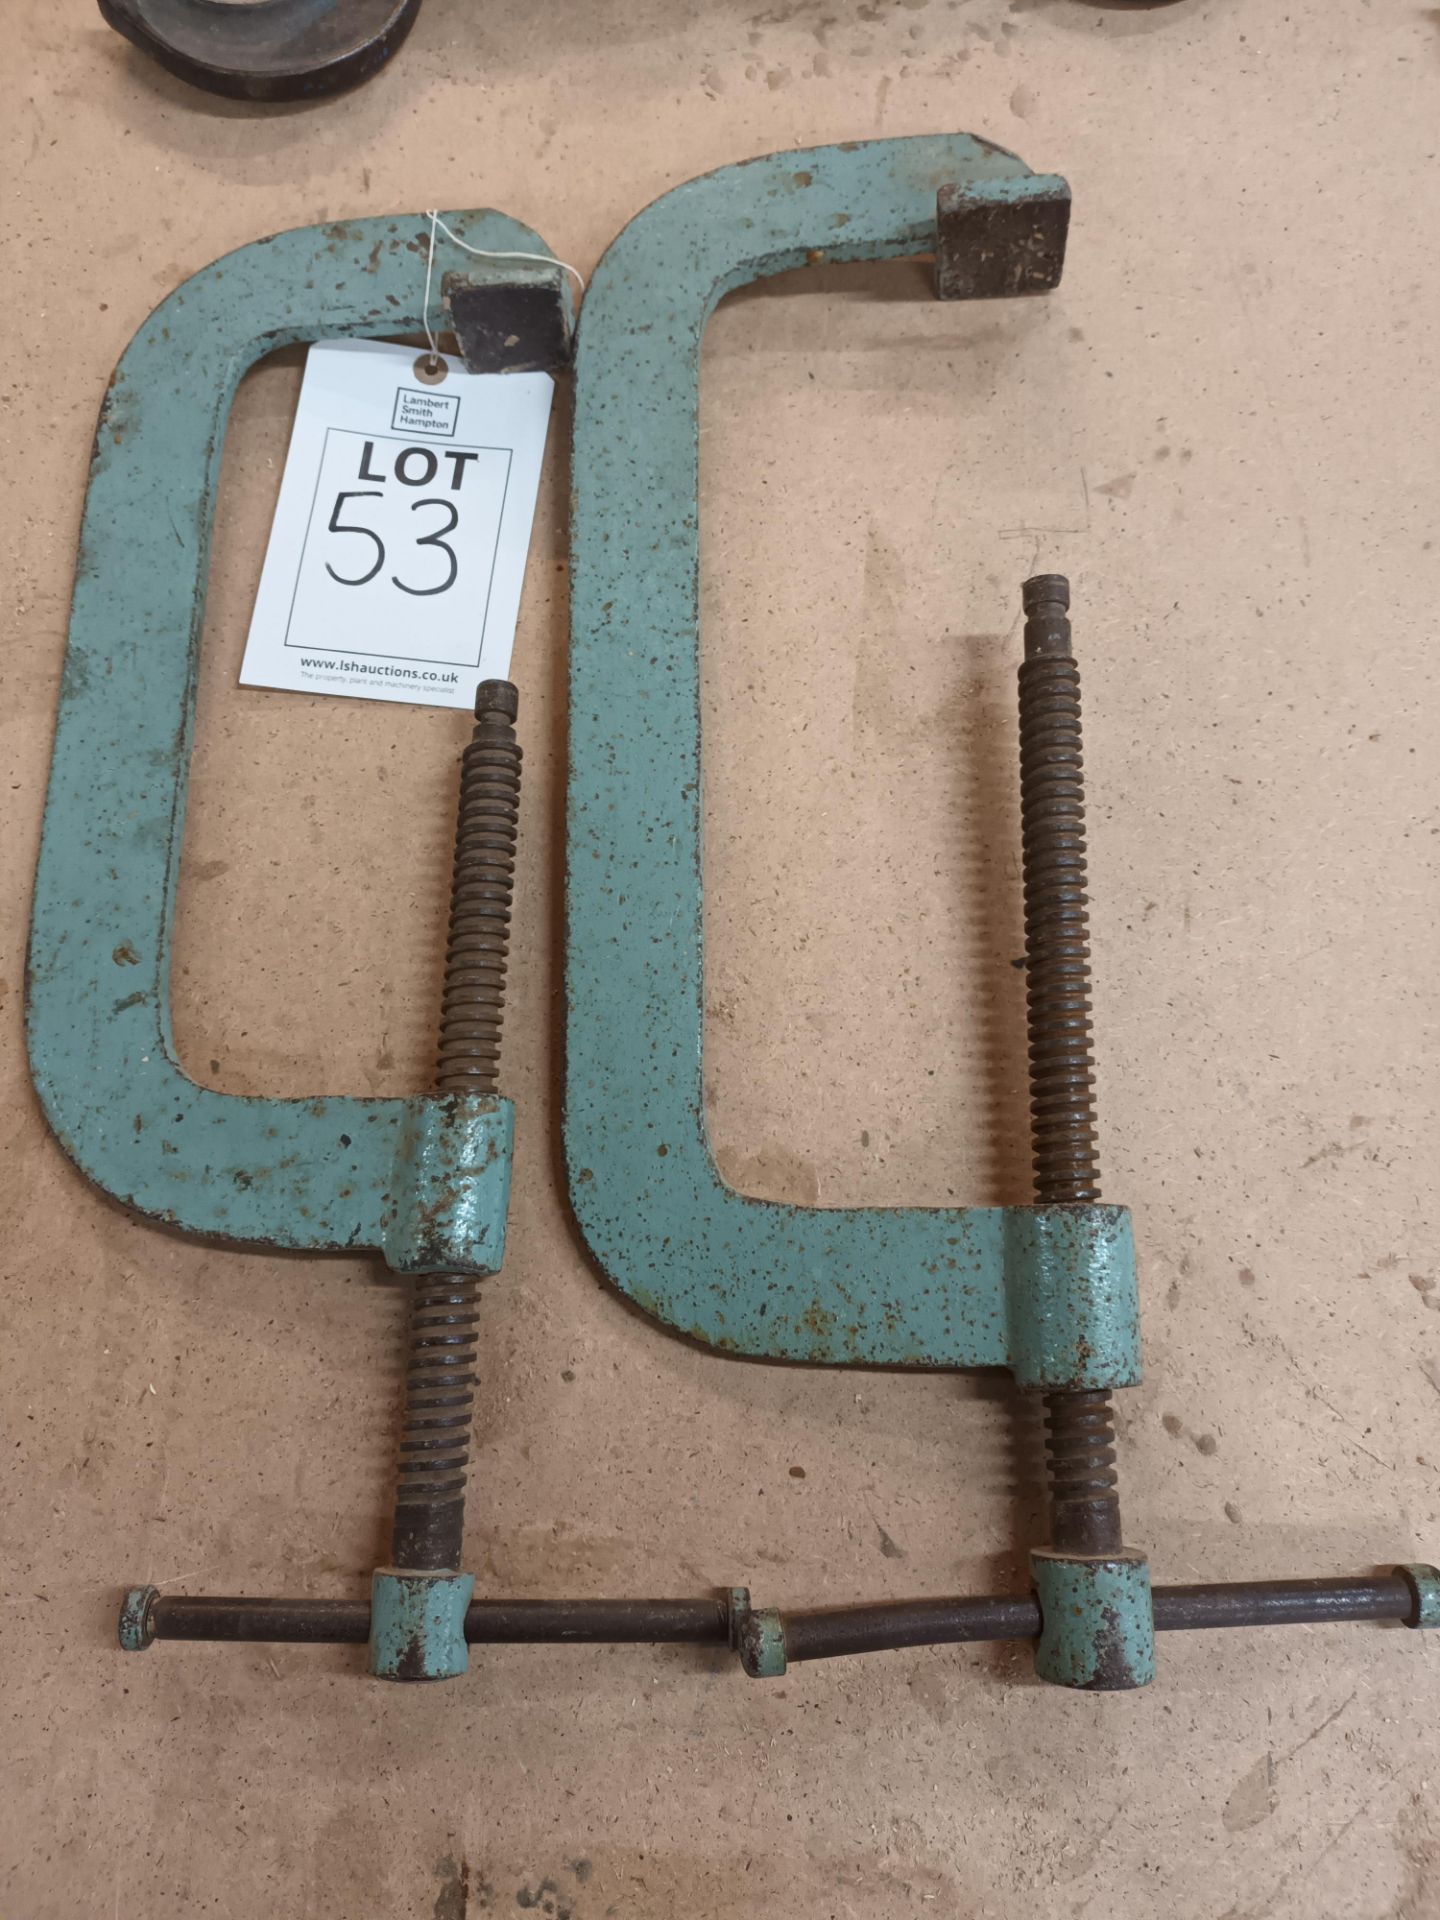 2 large G-clamps